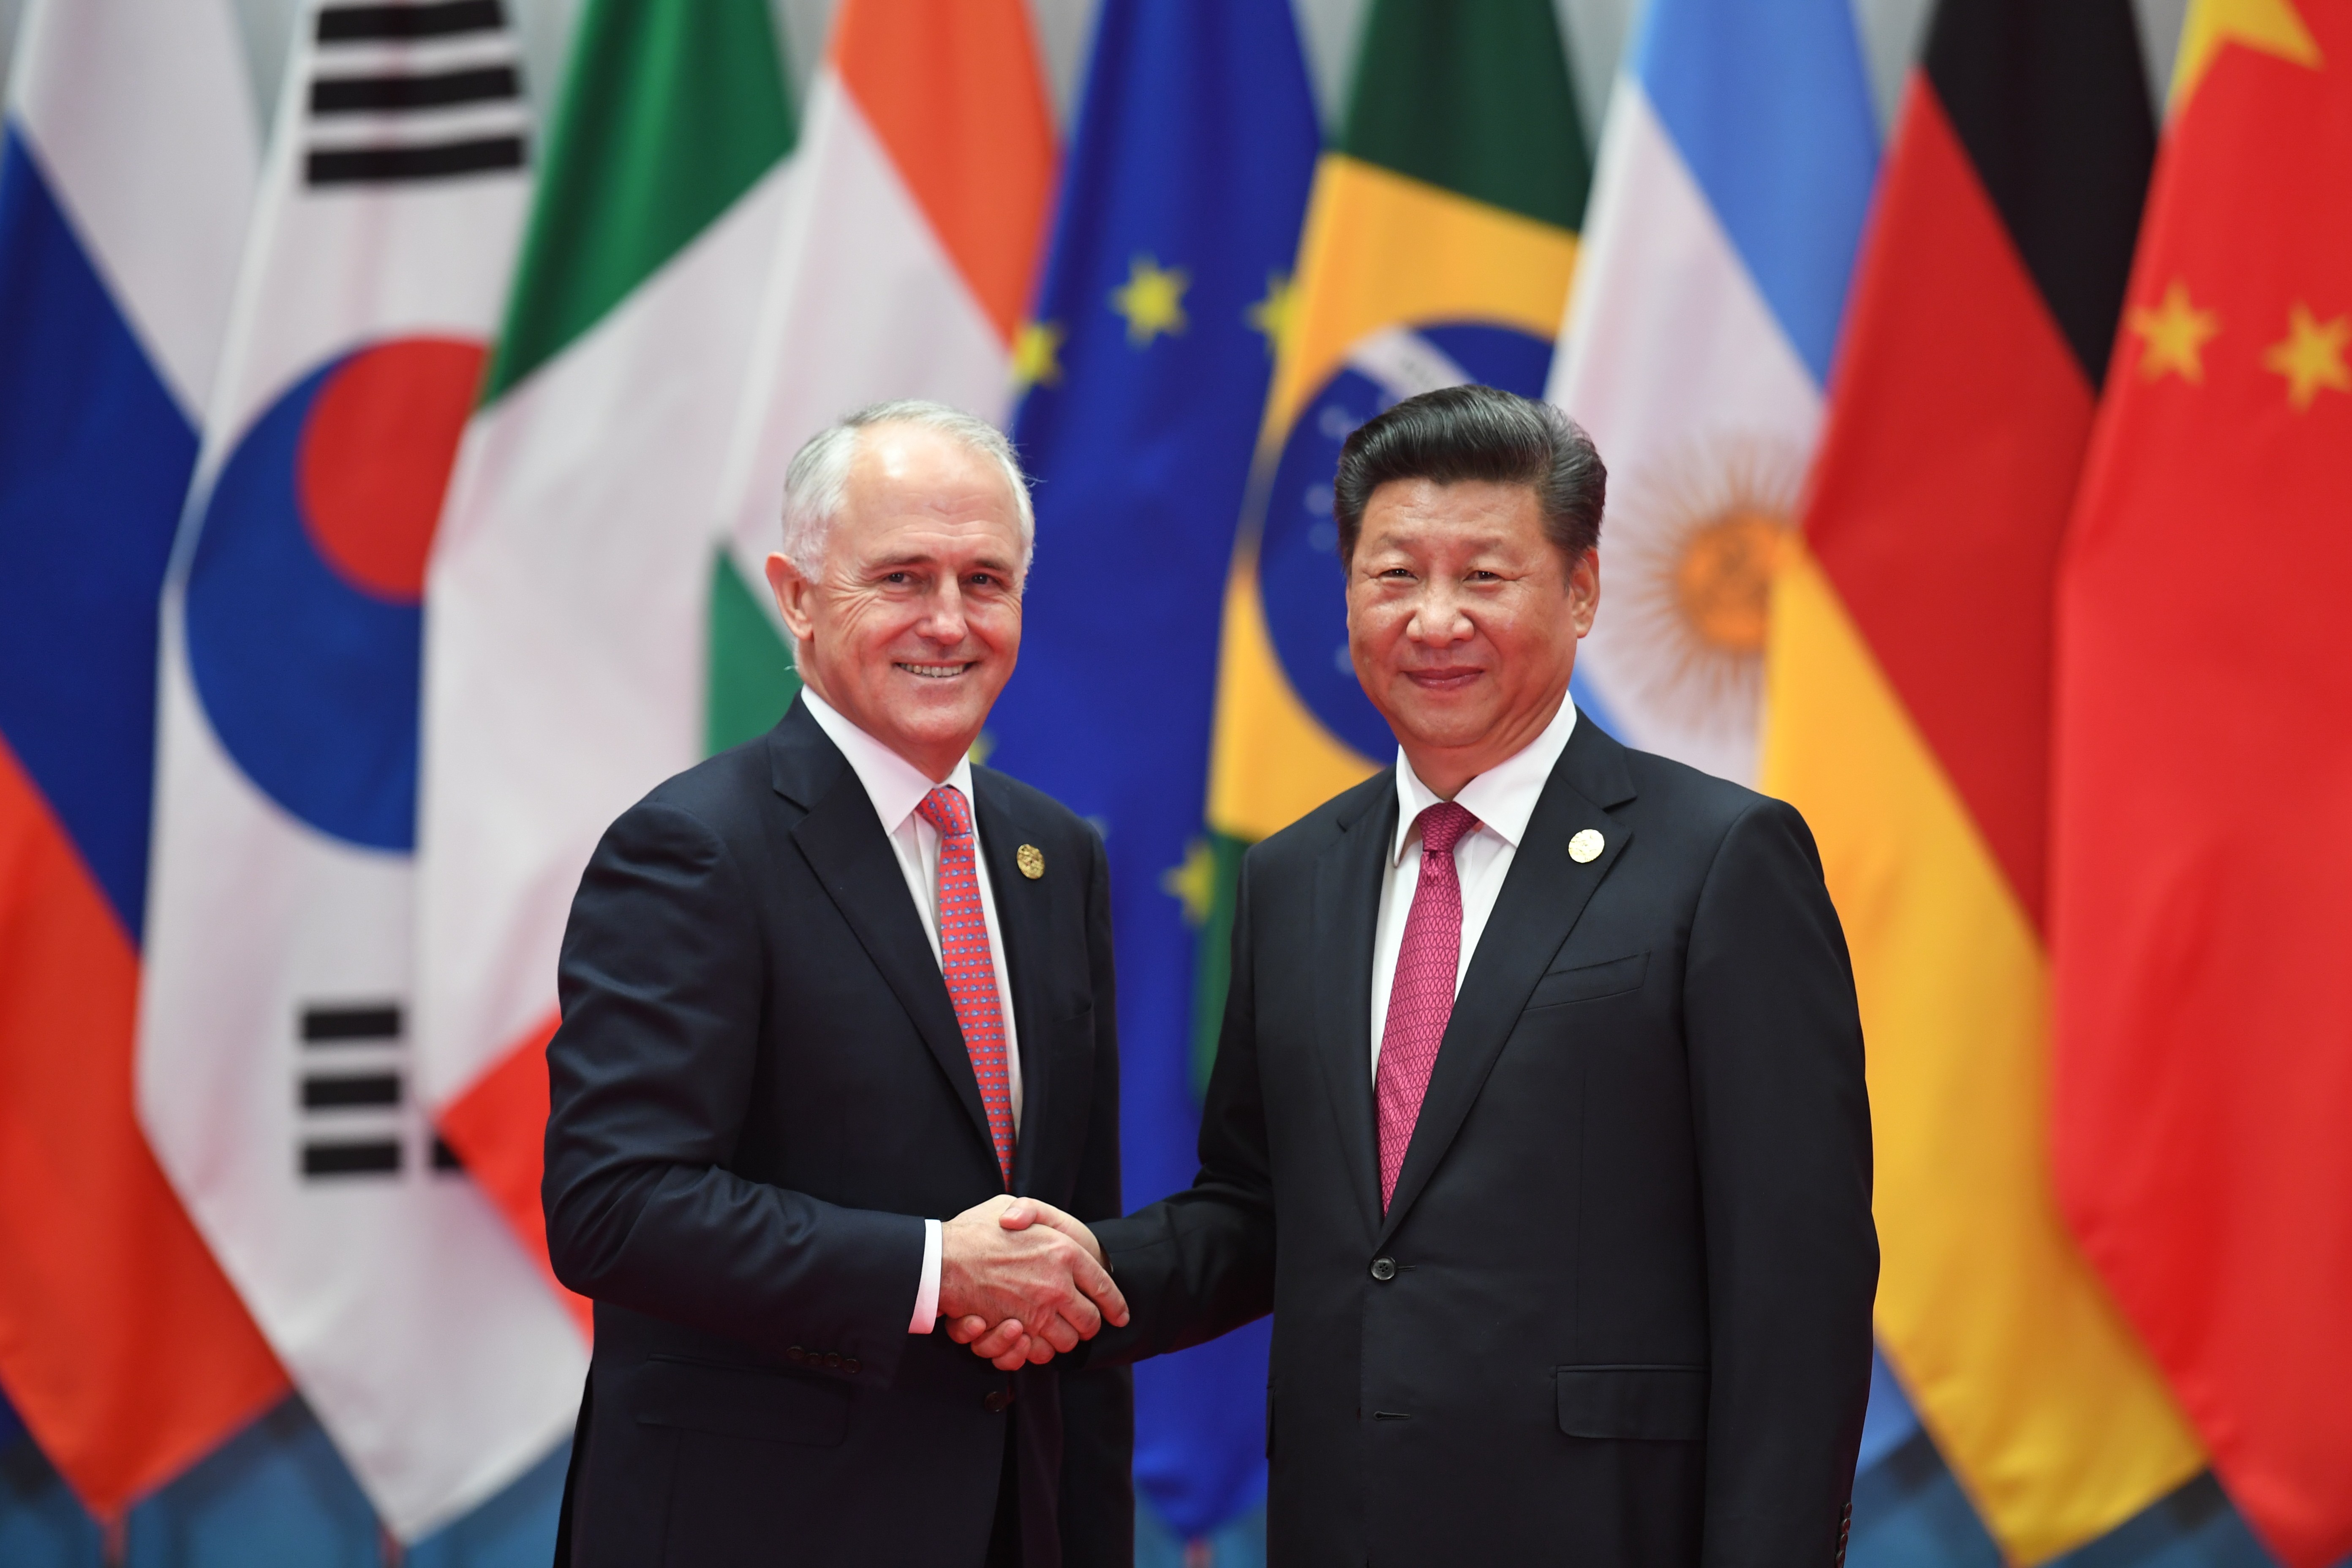 Australia’s Prime Minister Malcolm Turnbull with China’s President Xi Jinping. Photo: AFP